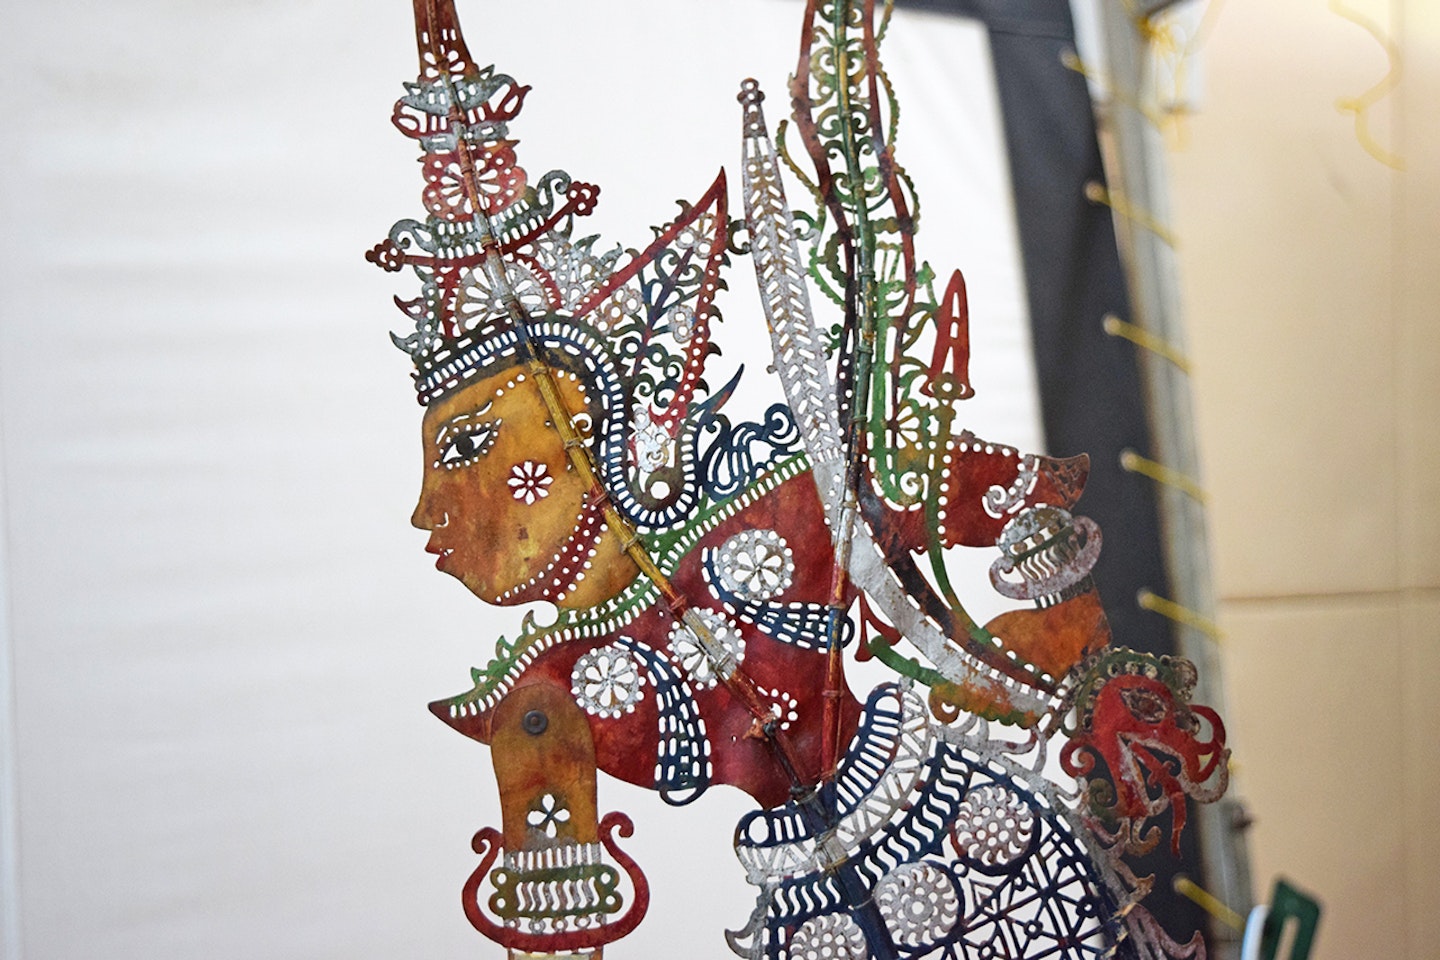 A journey into the life of wayang kulit artist, the traditional Malaysian leather shadow puppets making art.  #vawaa #art #artist #creativity #puppets #leather #puppets #makers #artisan #malaysia